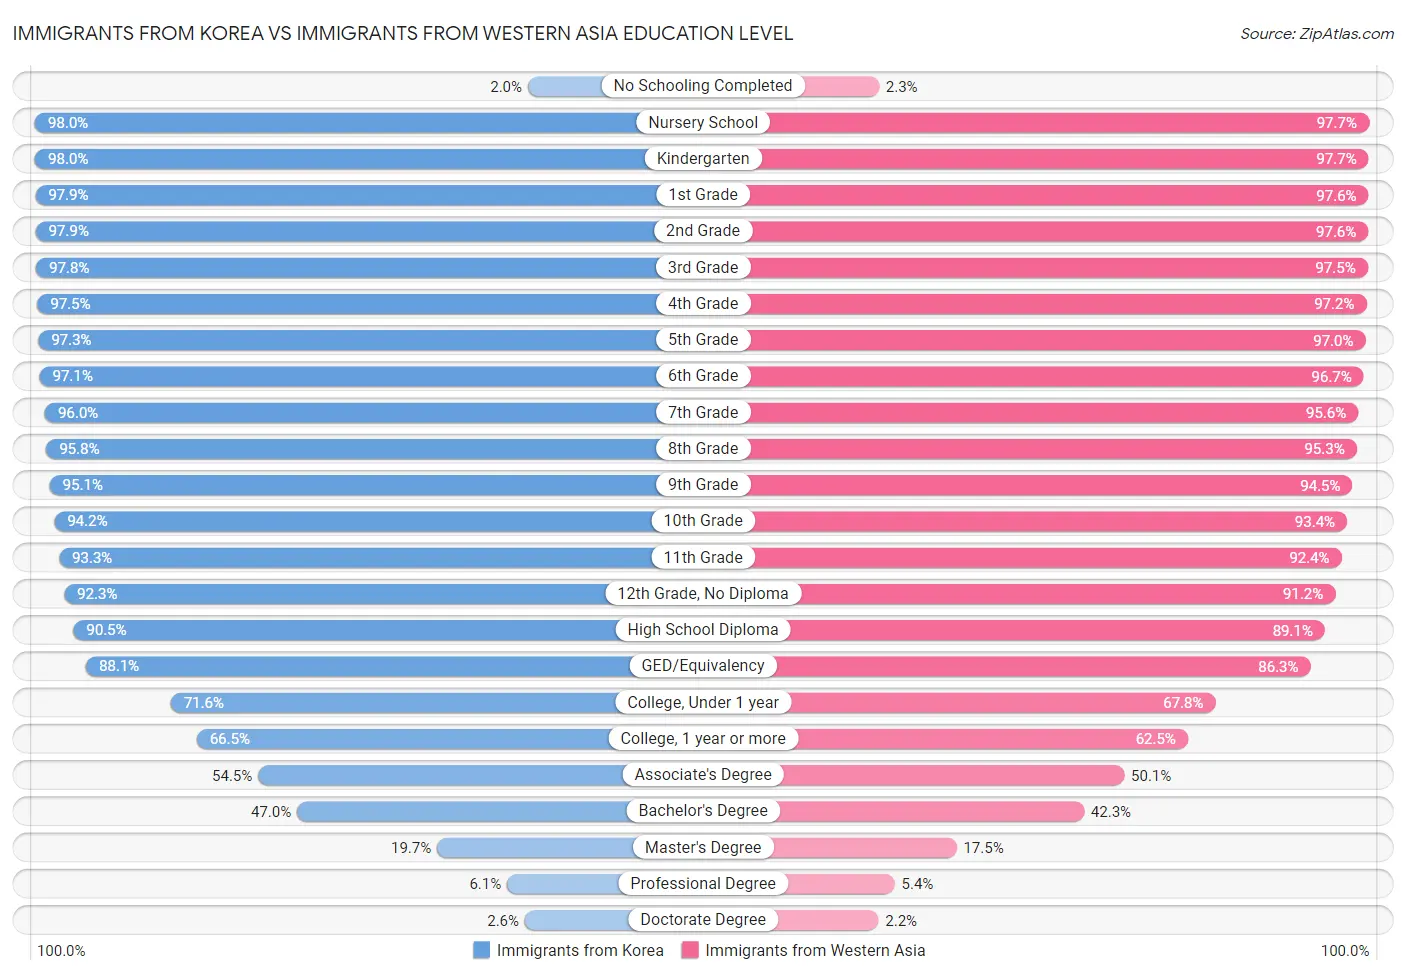 Immigrants from Korea vs Immigrants from Western Asia Education Level